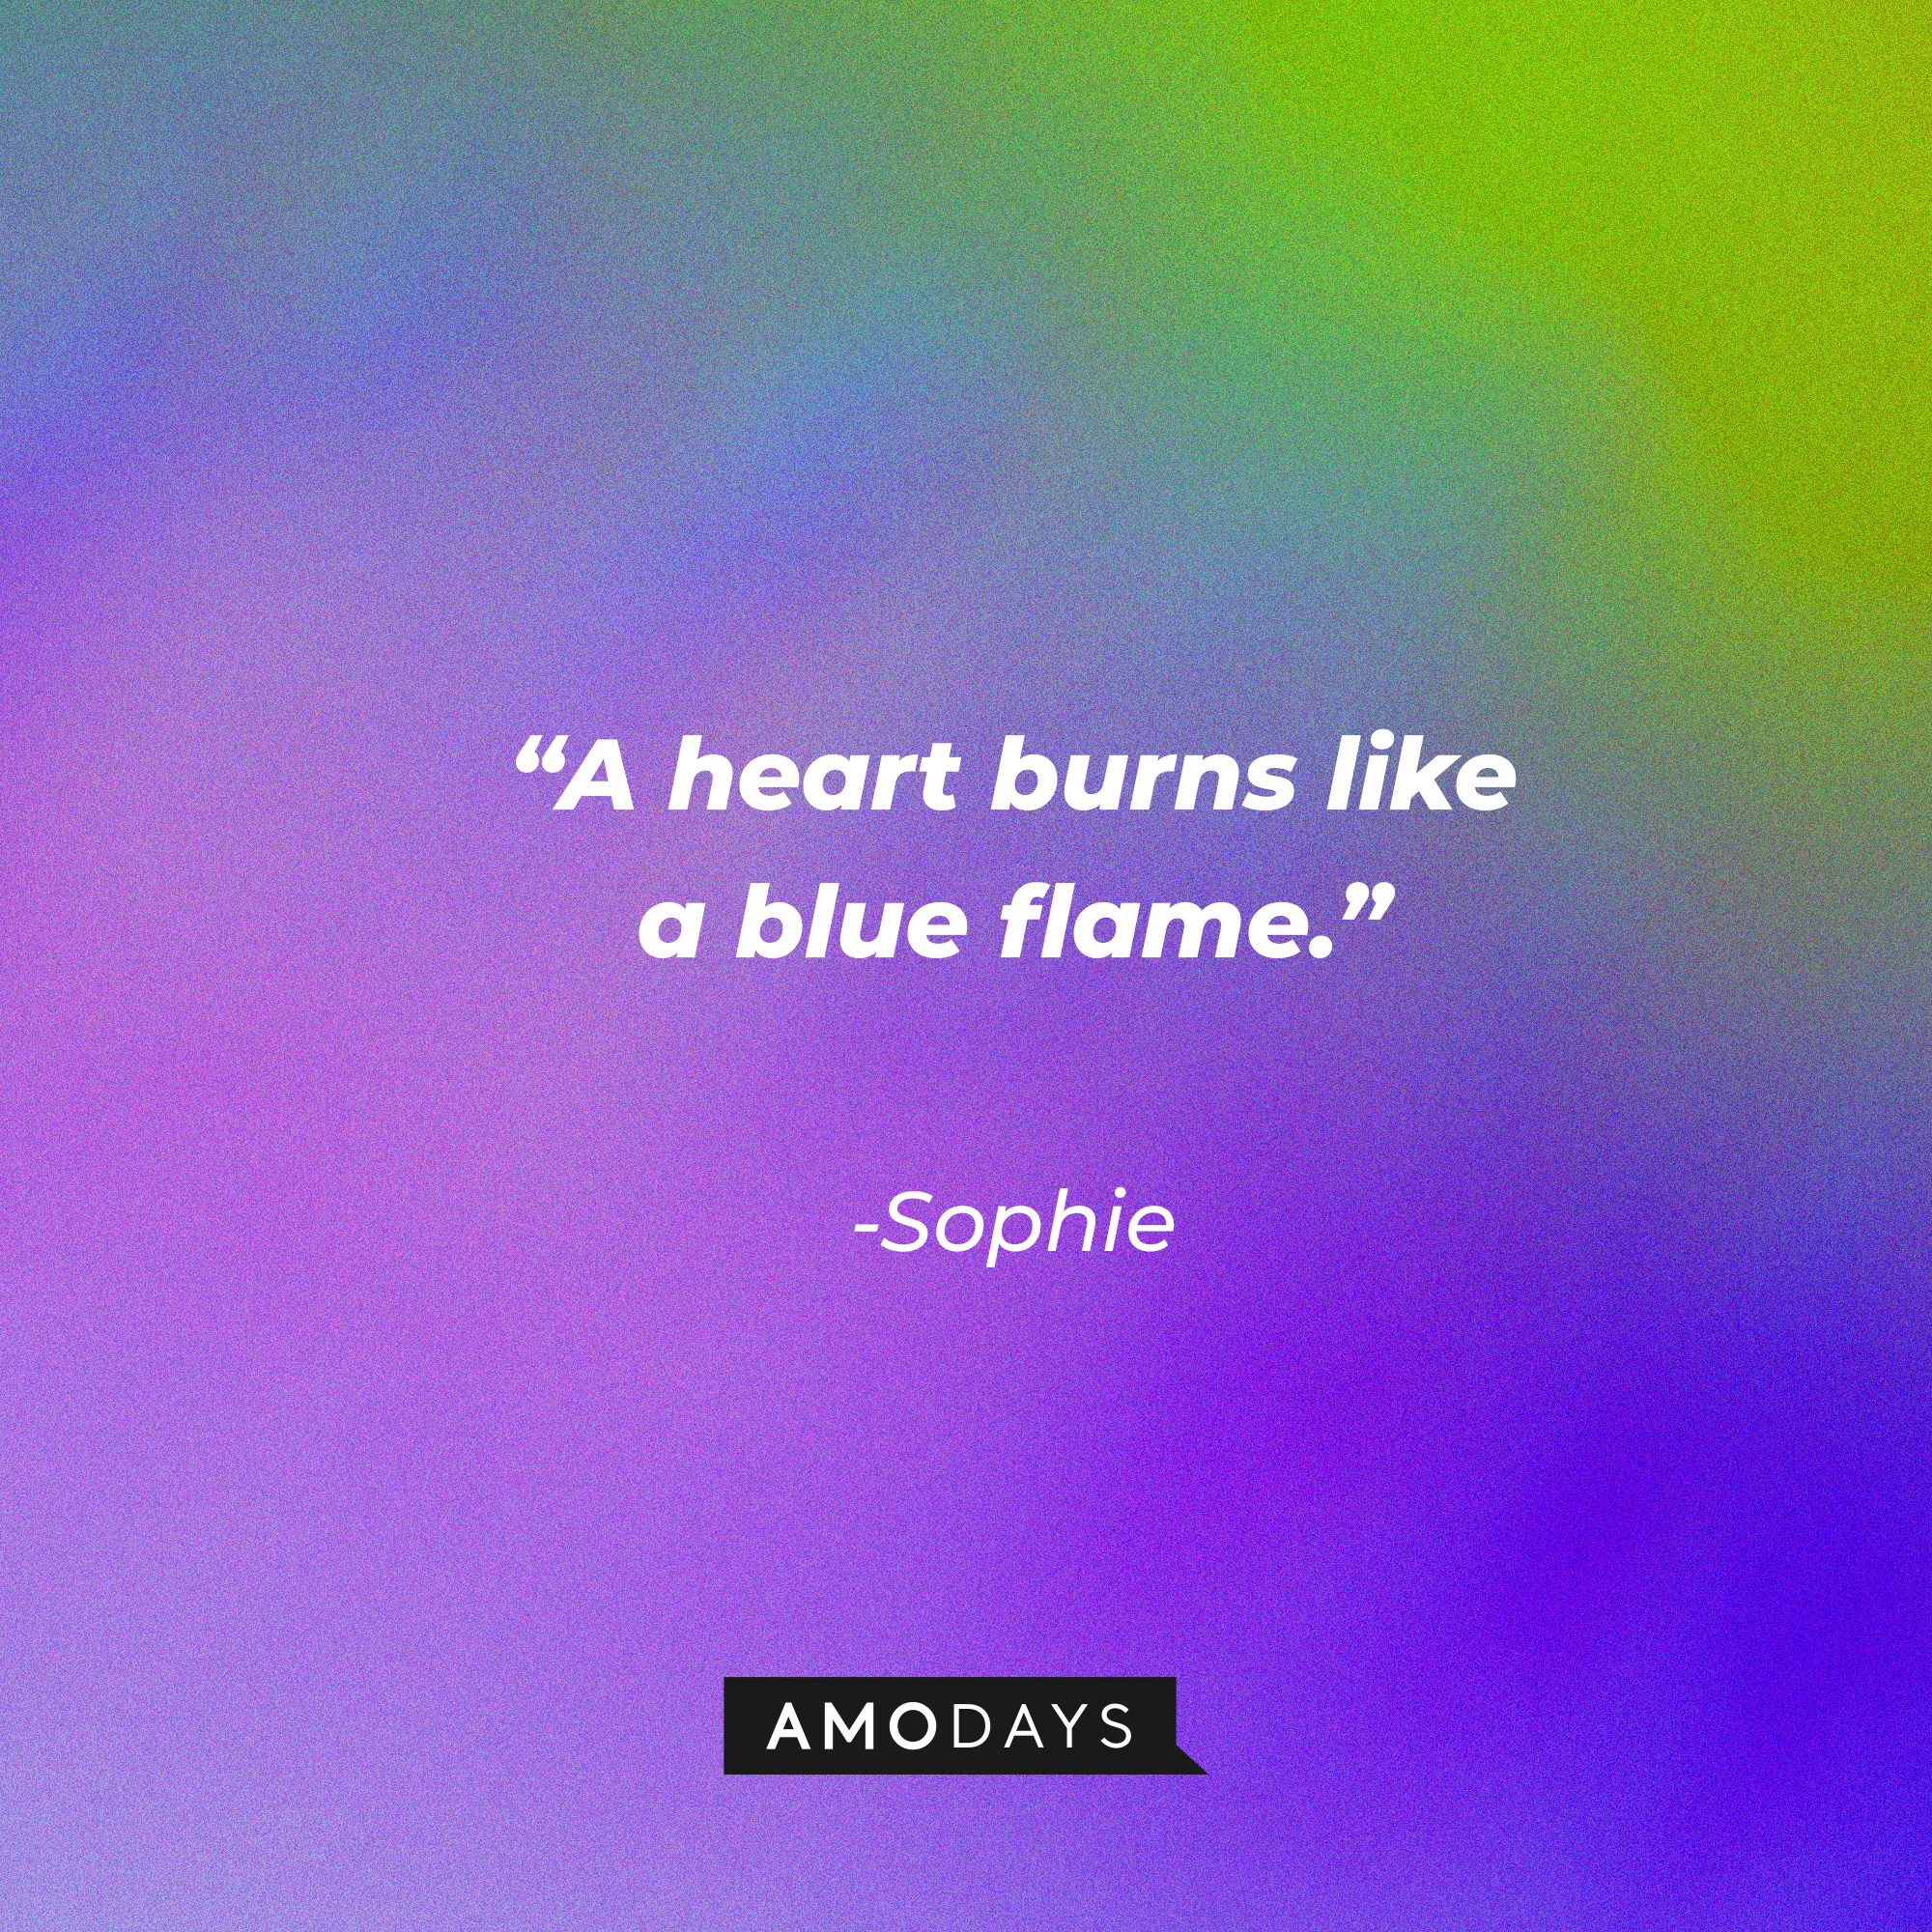 Sophie’s quote: “A heart burns like a blue flame.” | Source: AmoDays